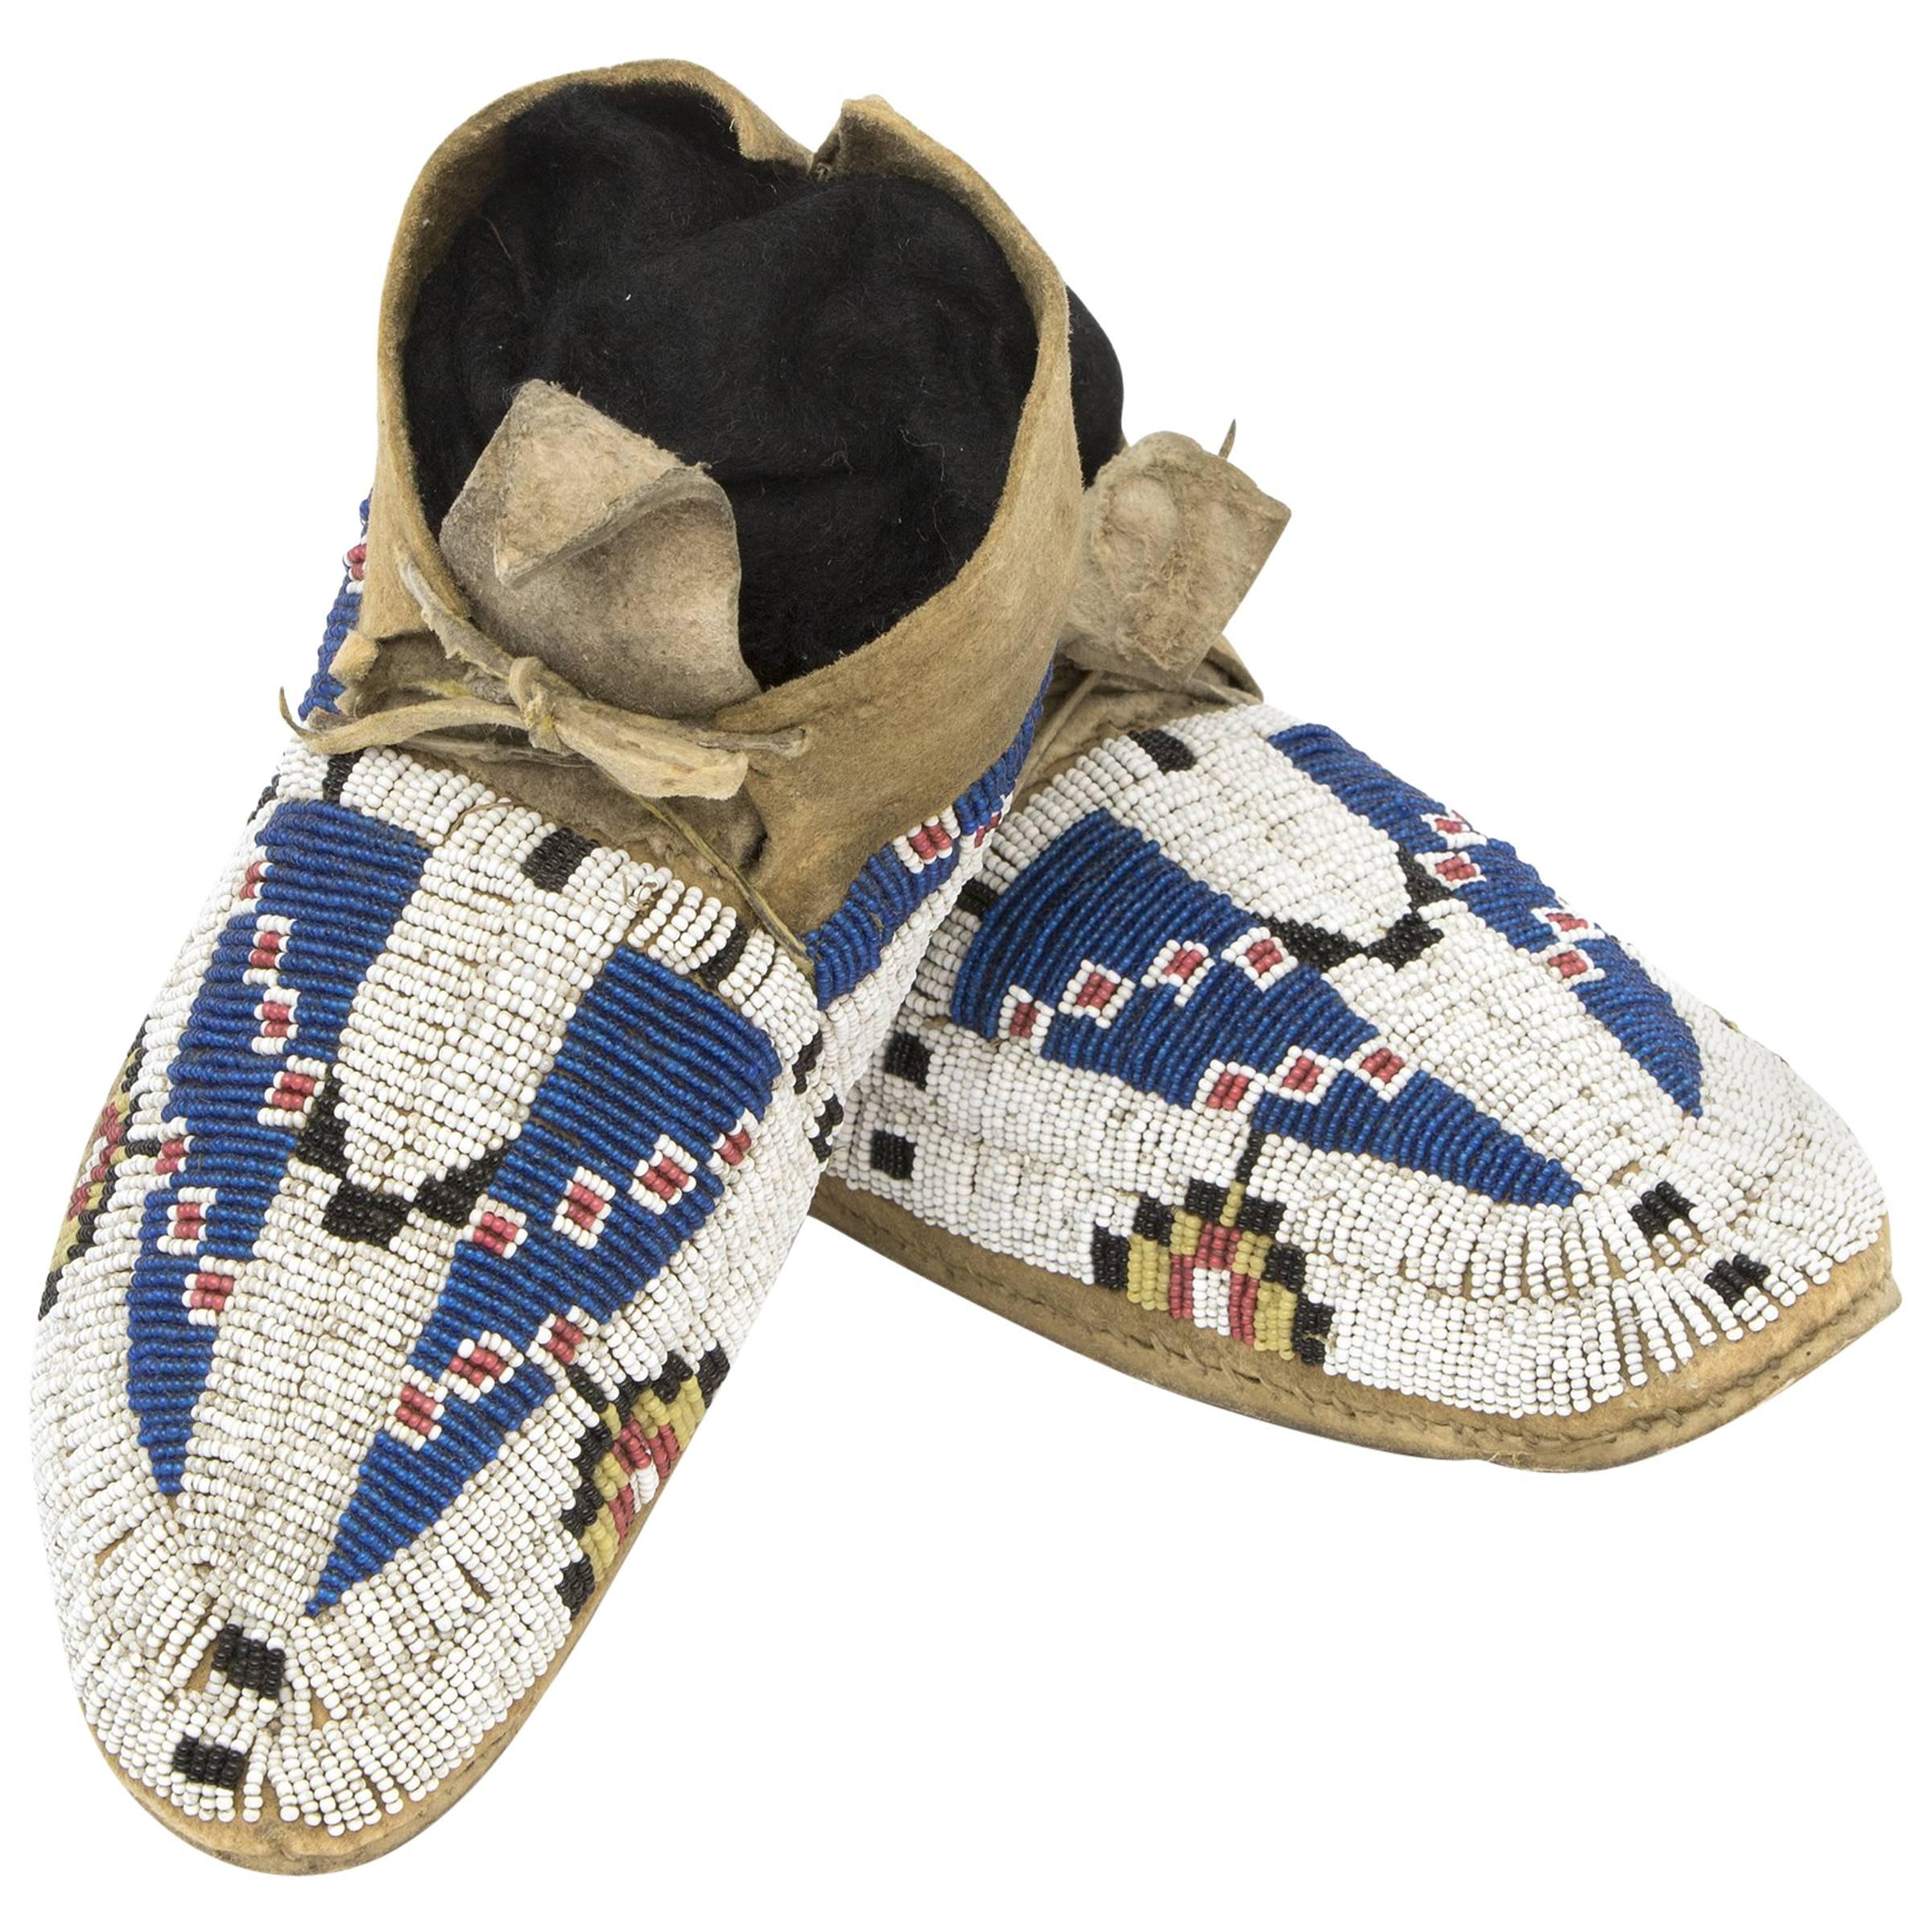 Antique Native American Beaded Child's Moccasins, Cheyenne, 19th Century